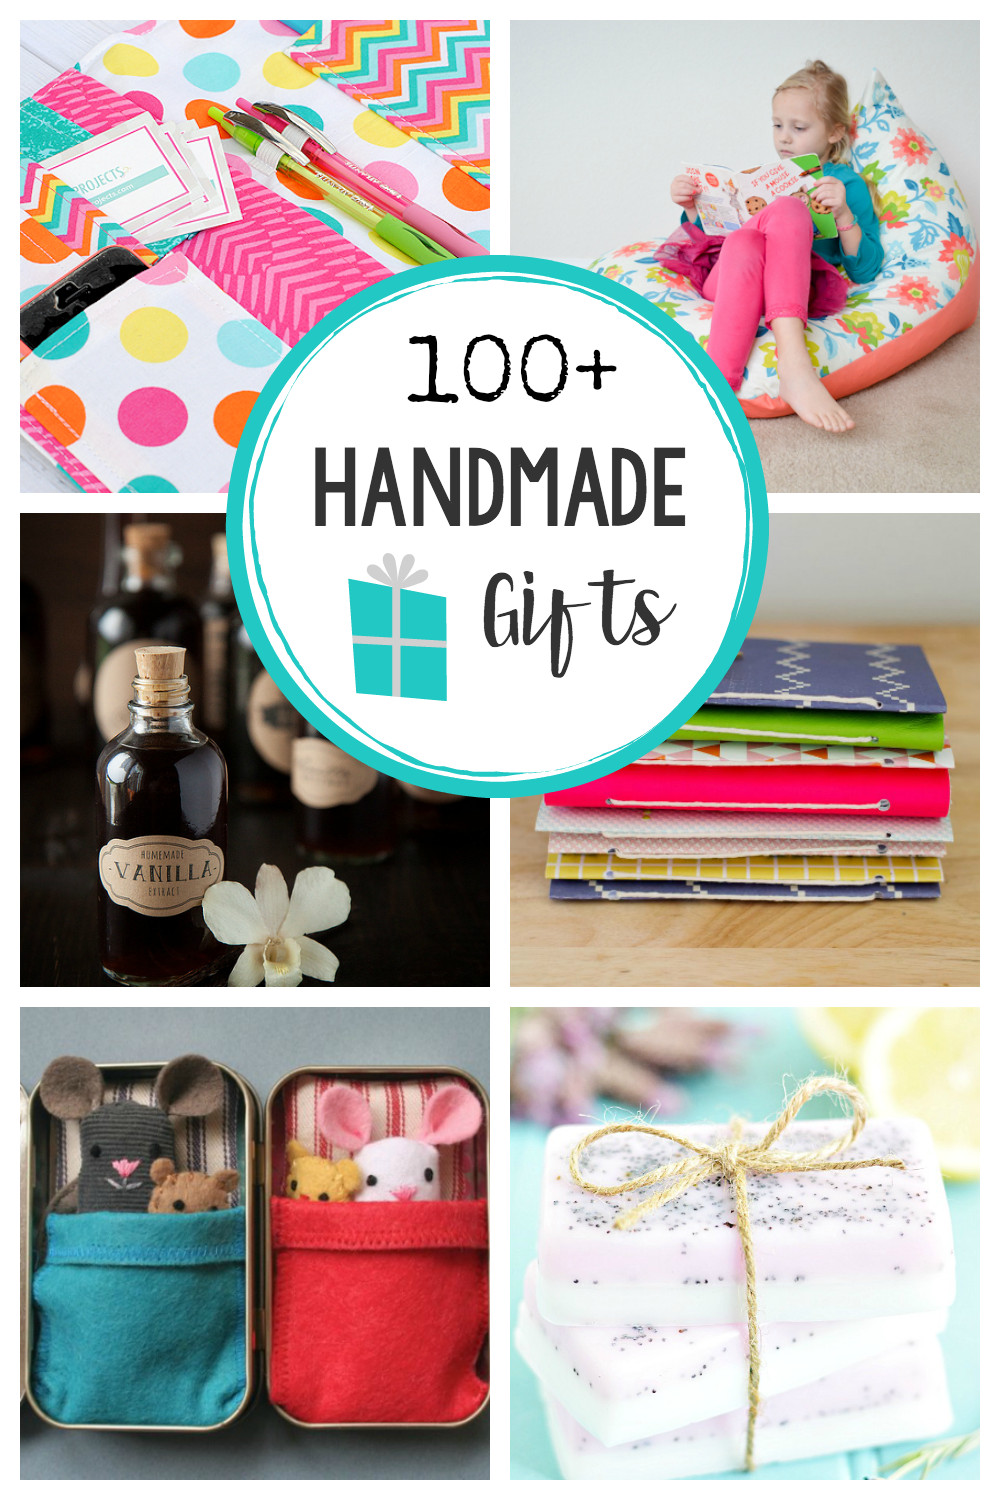 Good Birthday Gifts For Kids
 Tons of Handmade Gifts 100 Ideas for Everyone on Your List